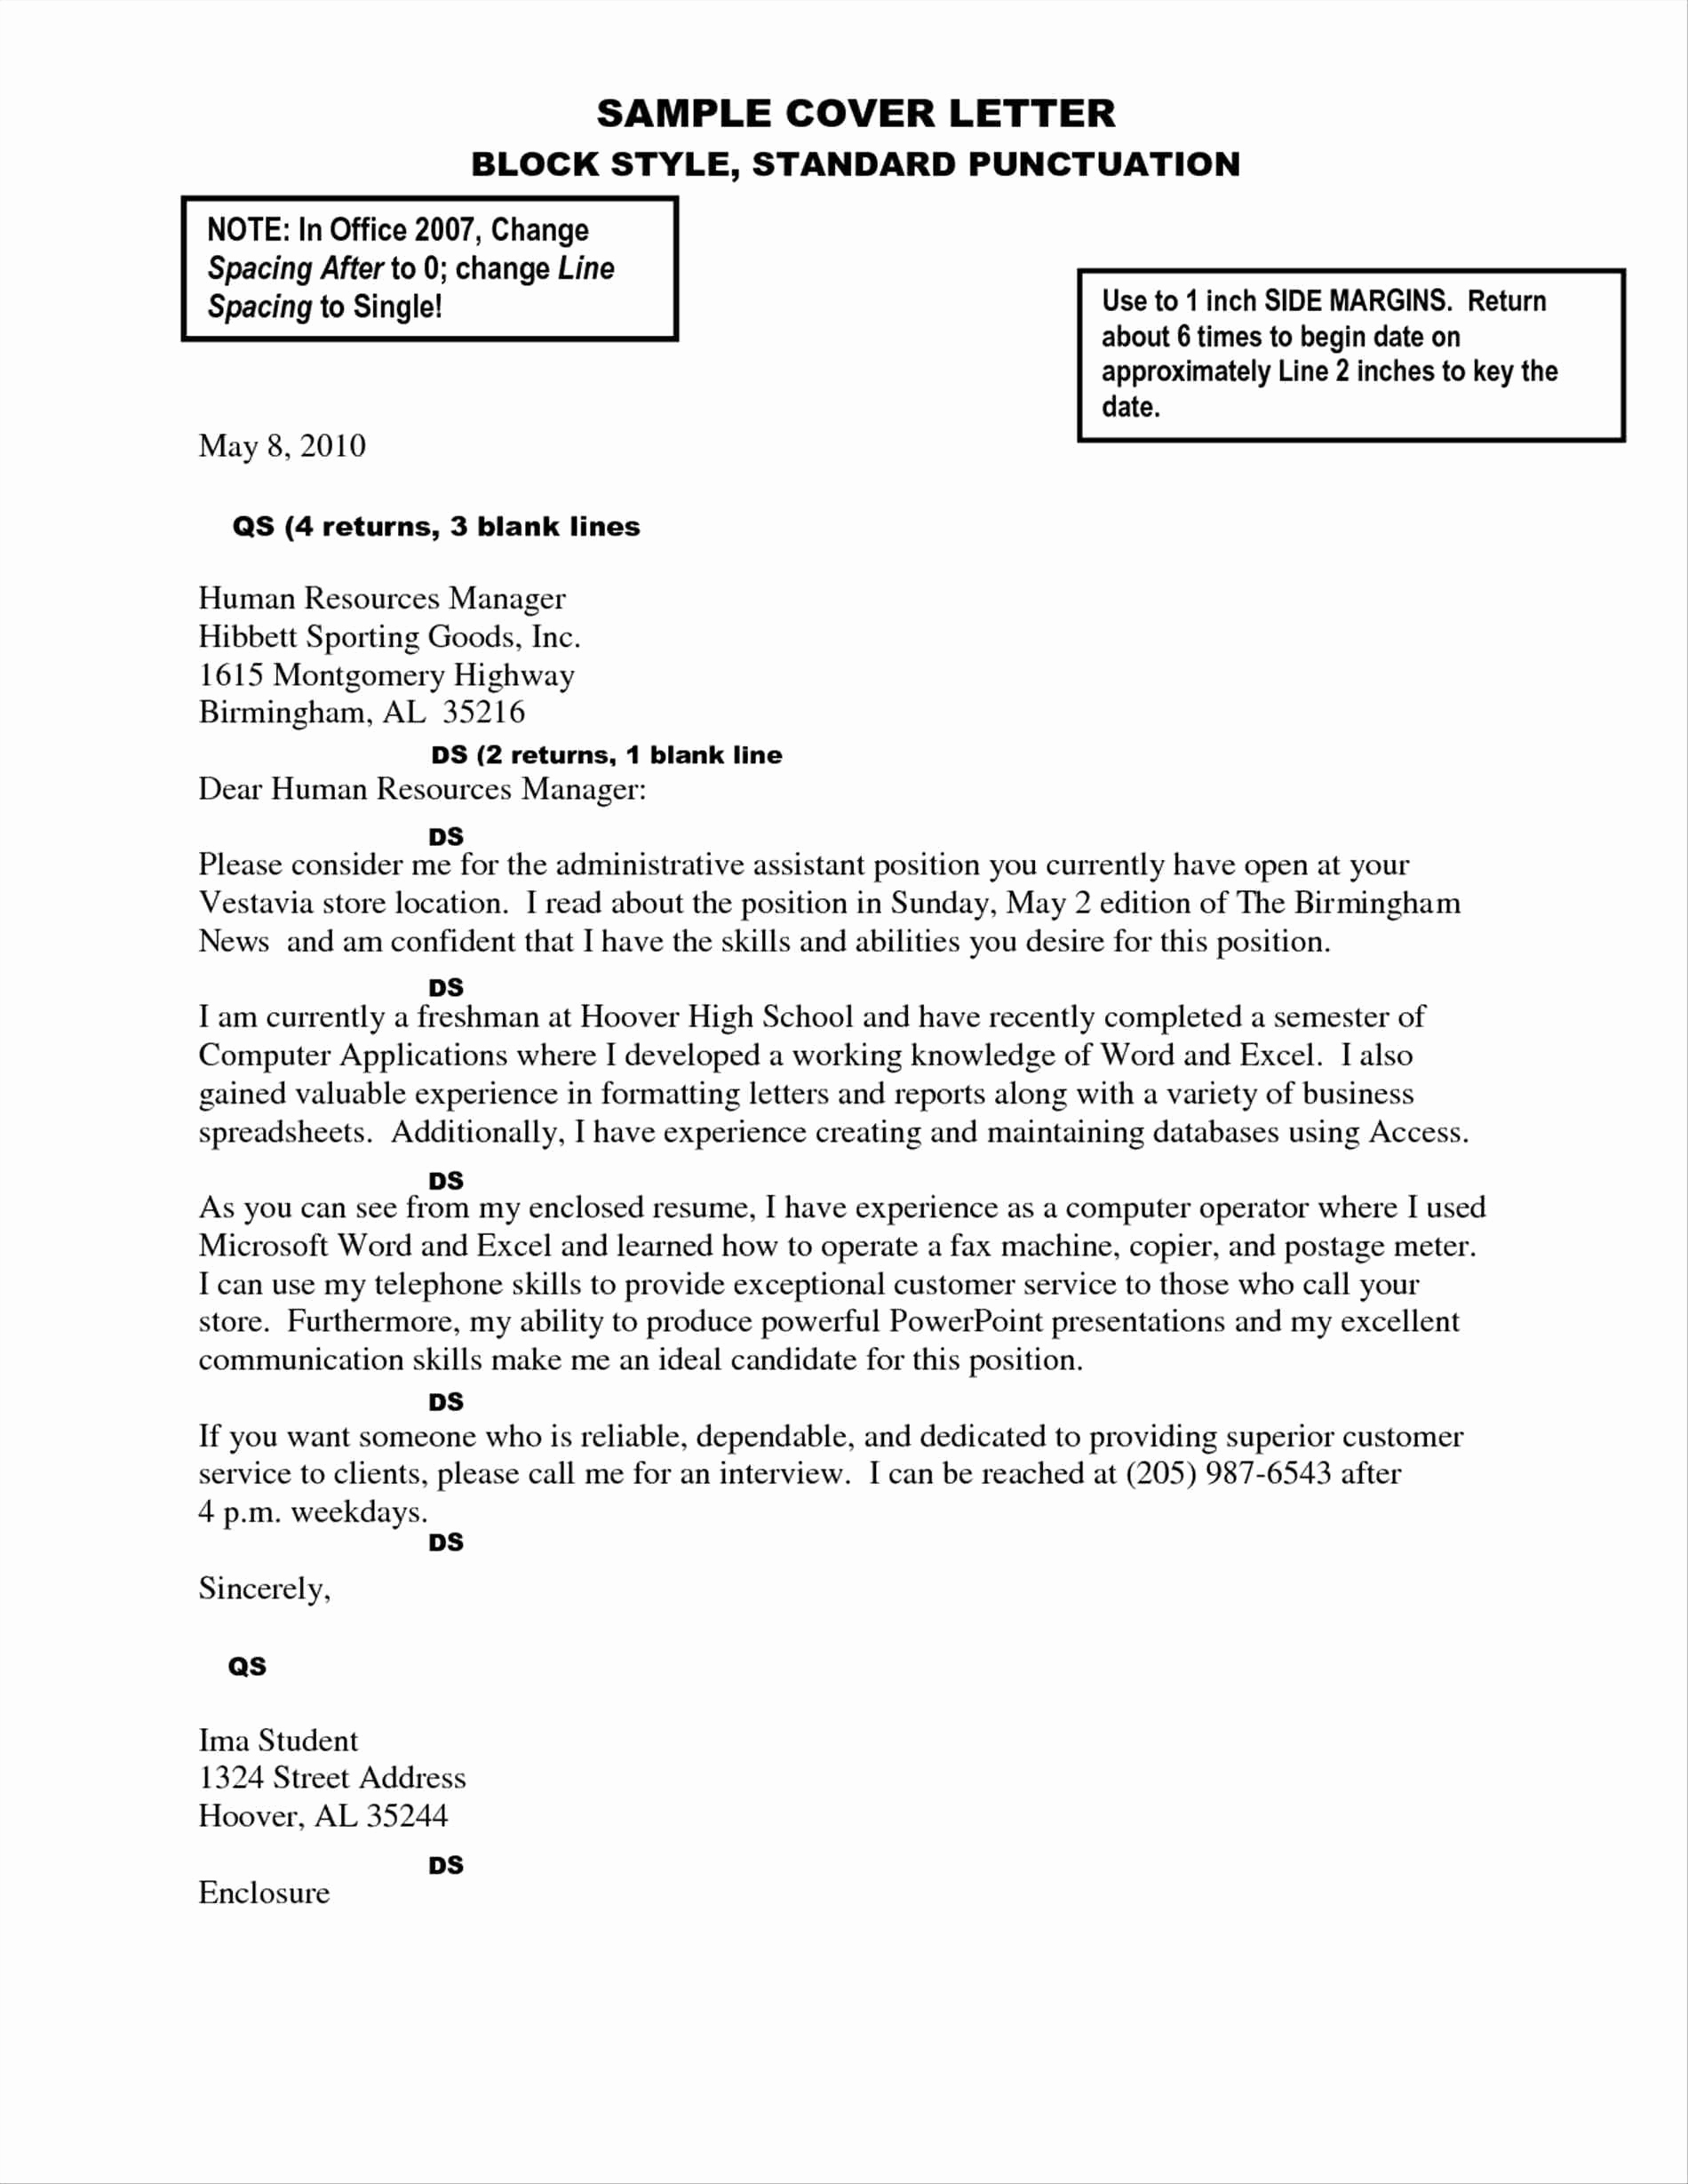 Legal Covering Letter Template - Free Sample Cover Letter Template Free Cover Letter Templates for